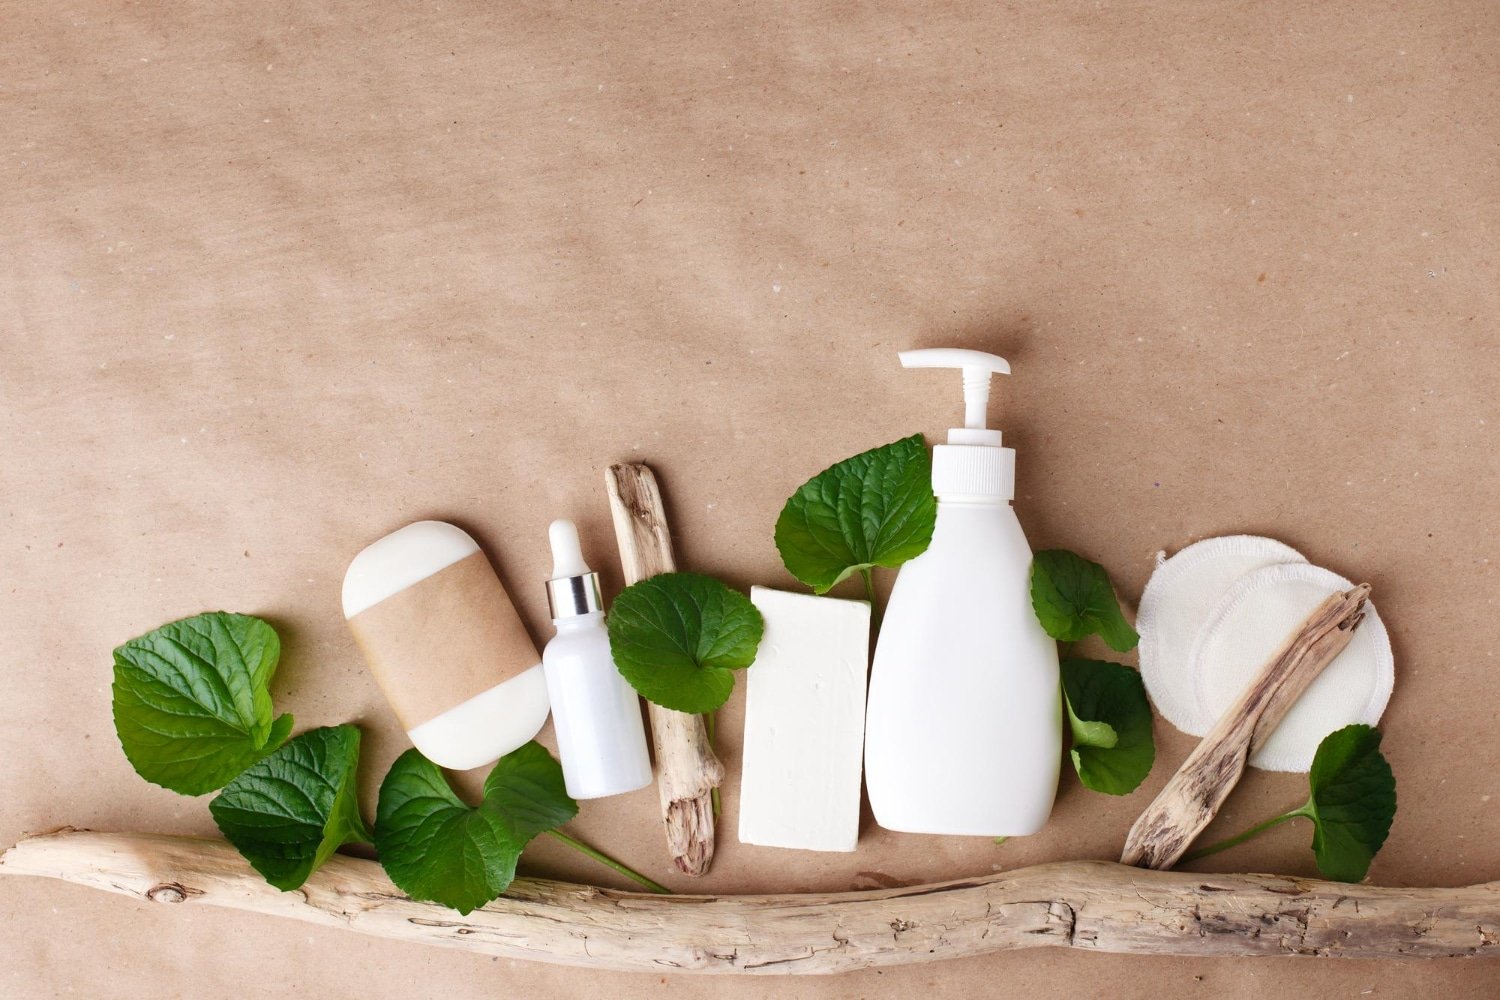 Pamper Your Skin Naturally With Biotyspa’s Organic Beauty Products